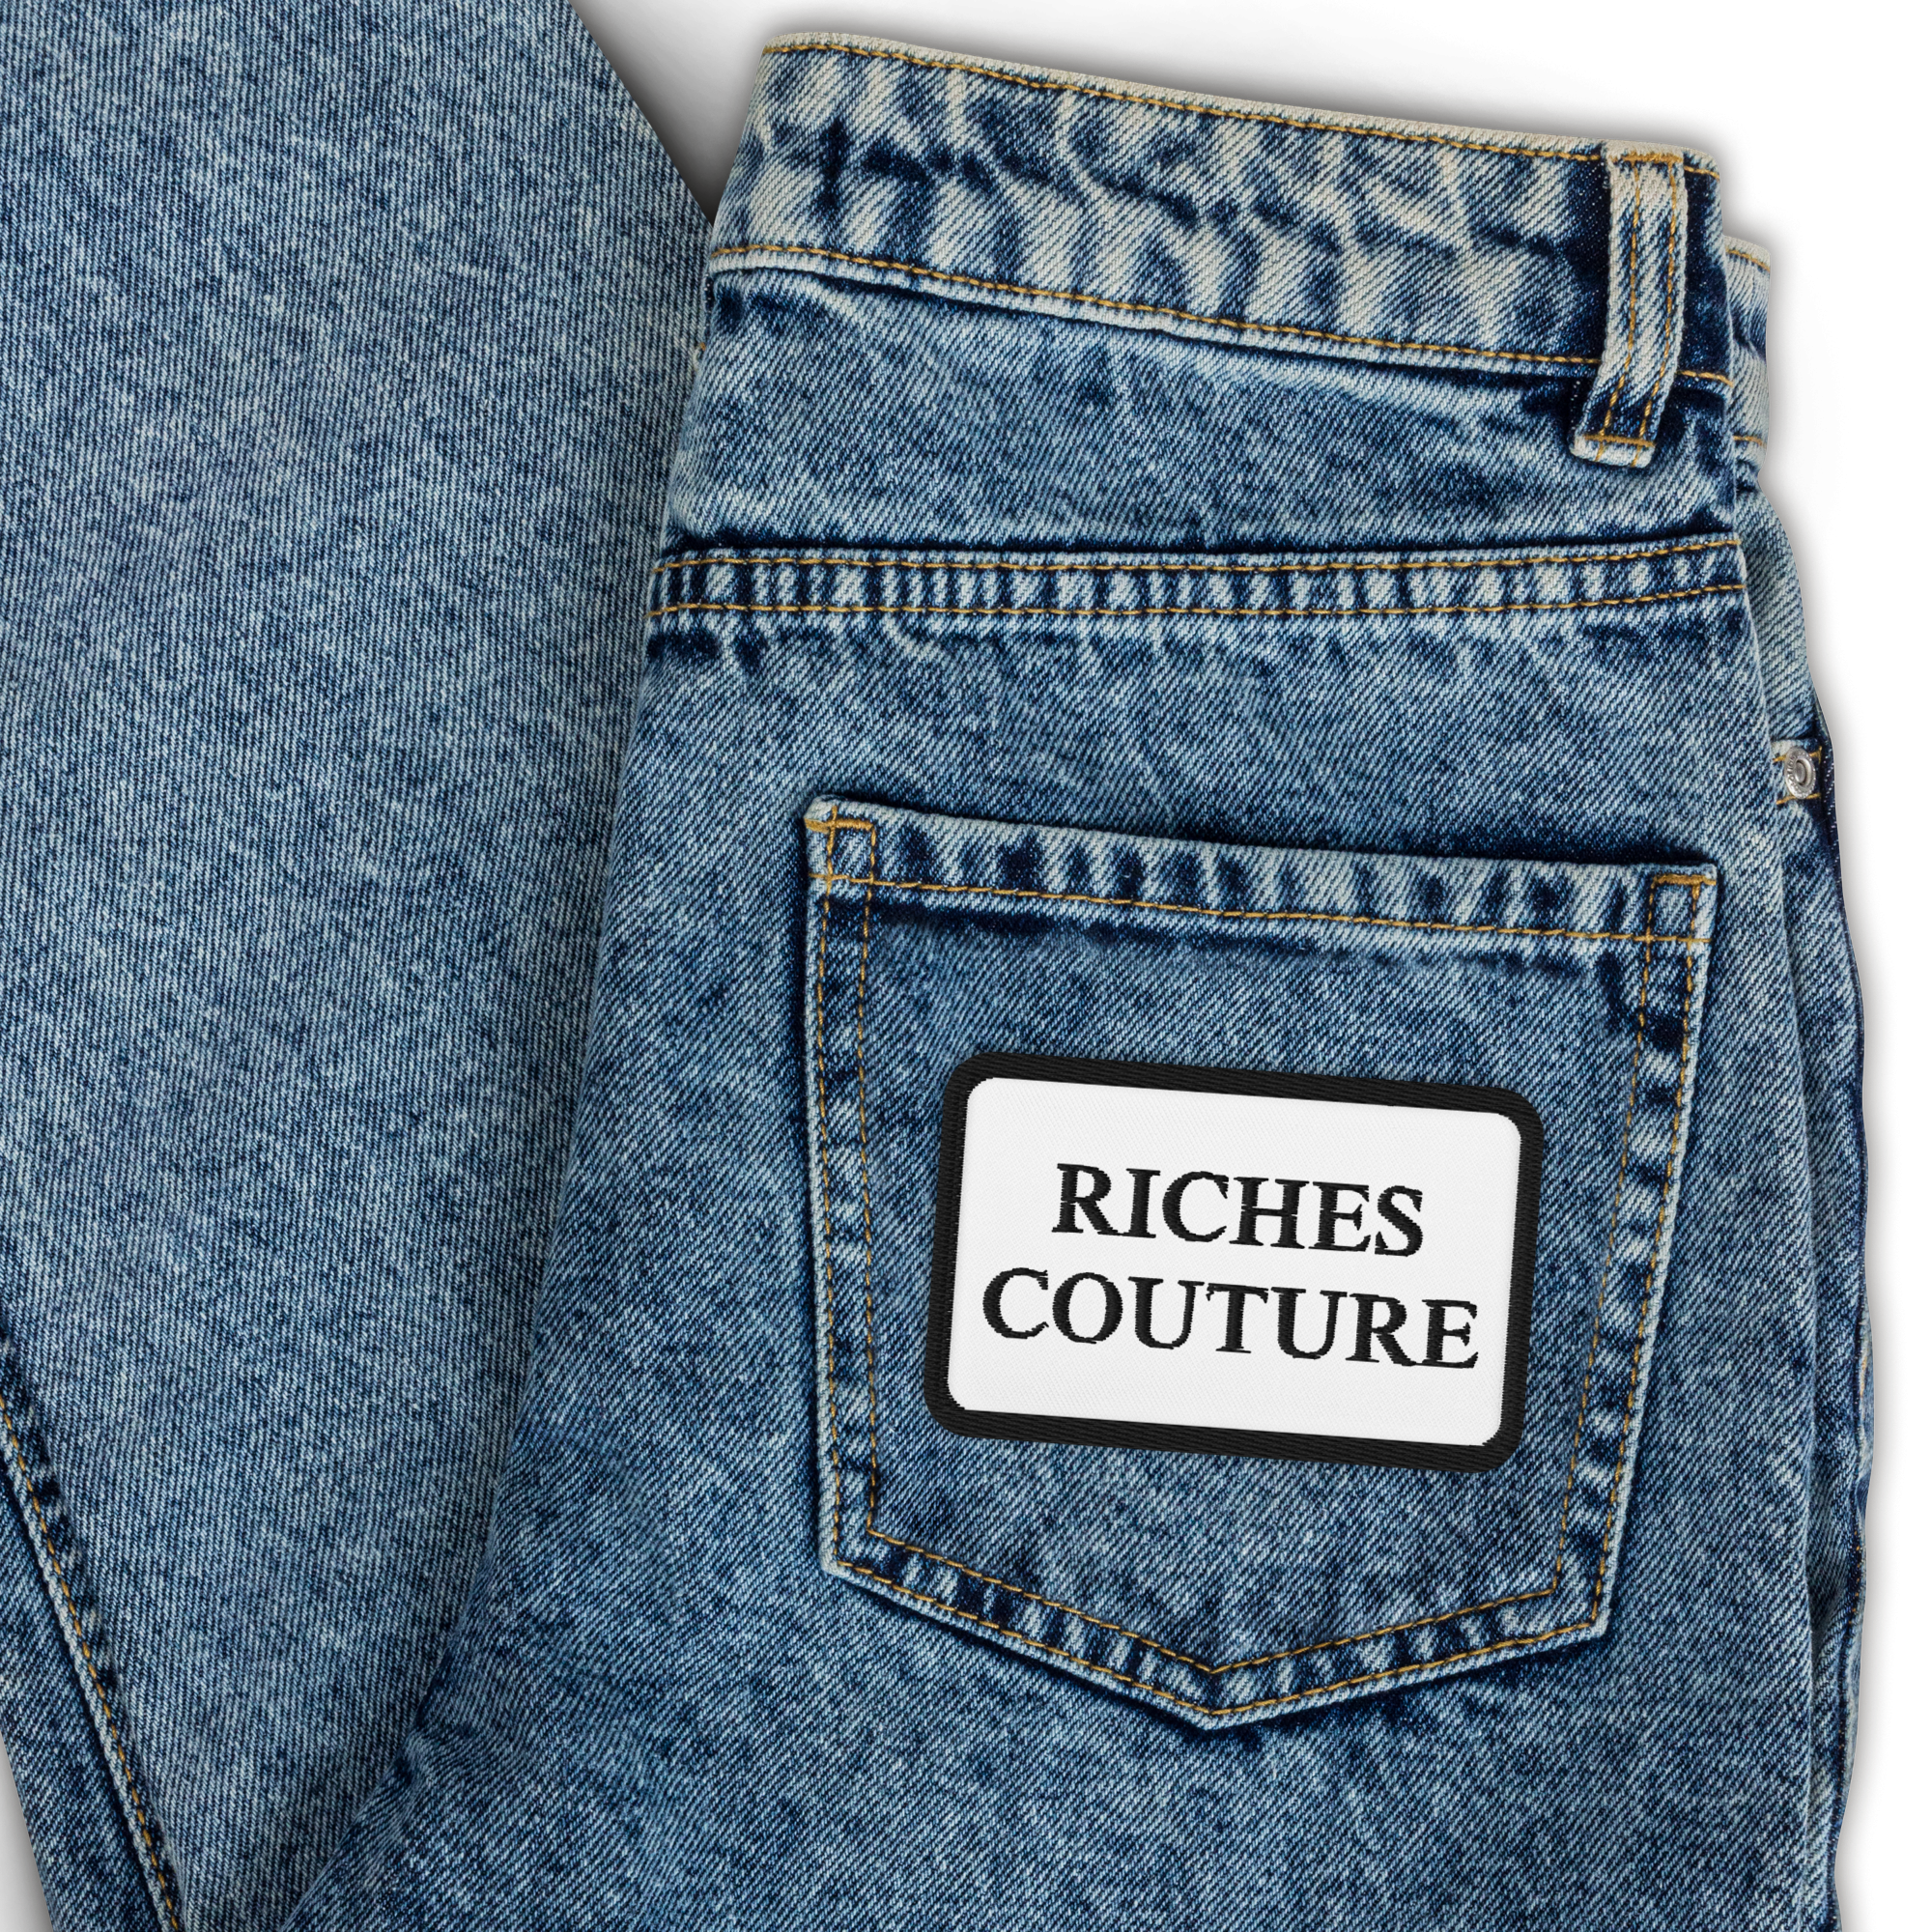 Riches Couture Black Embroidered Patch